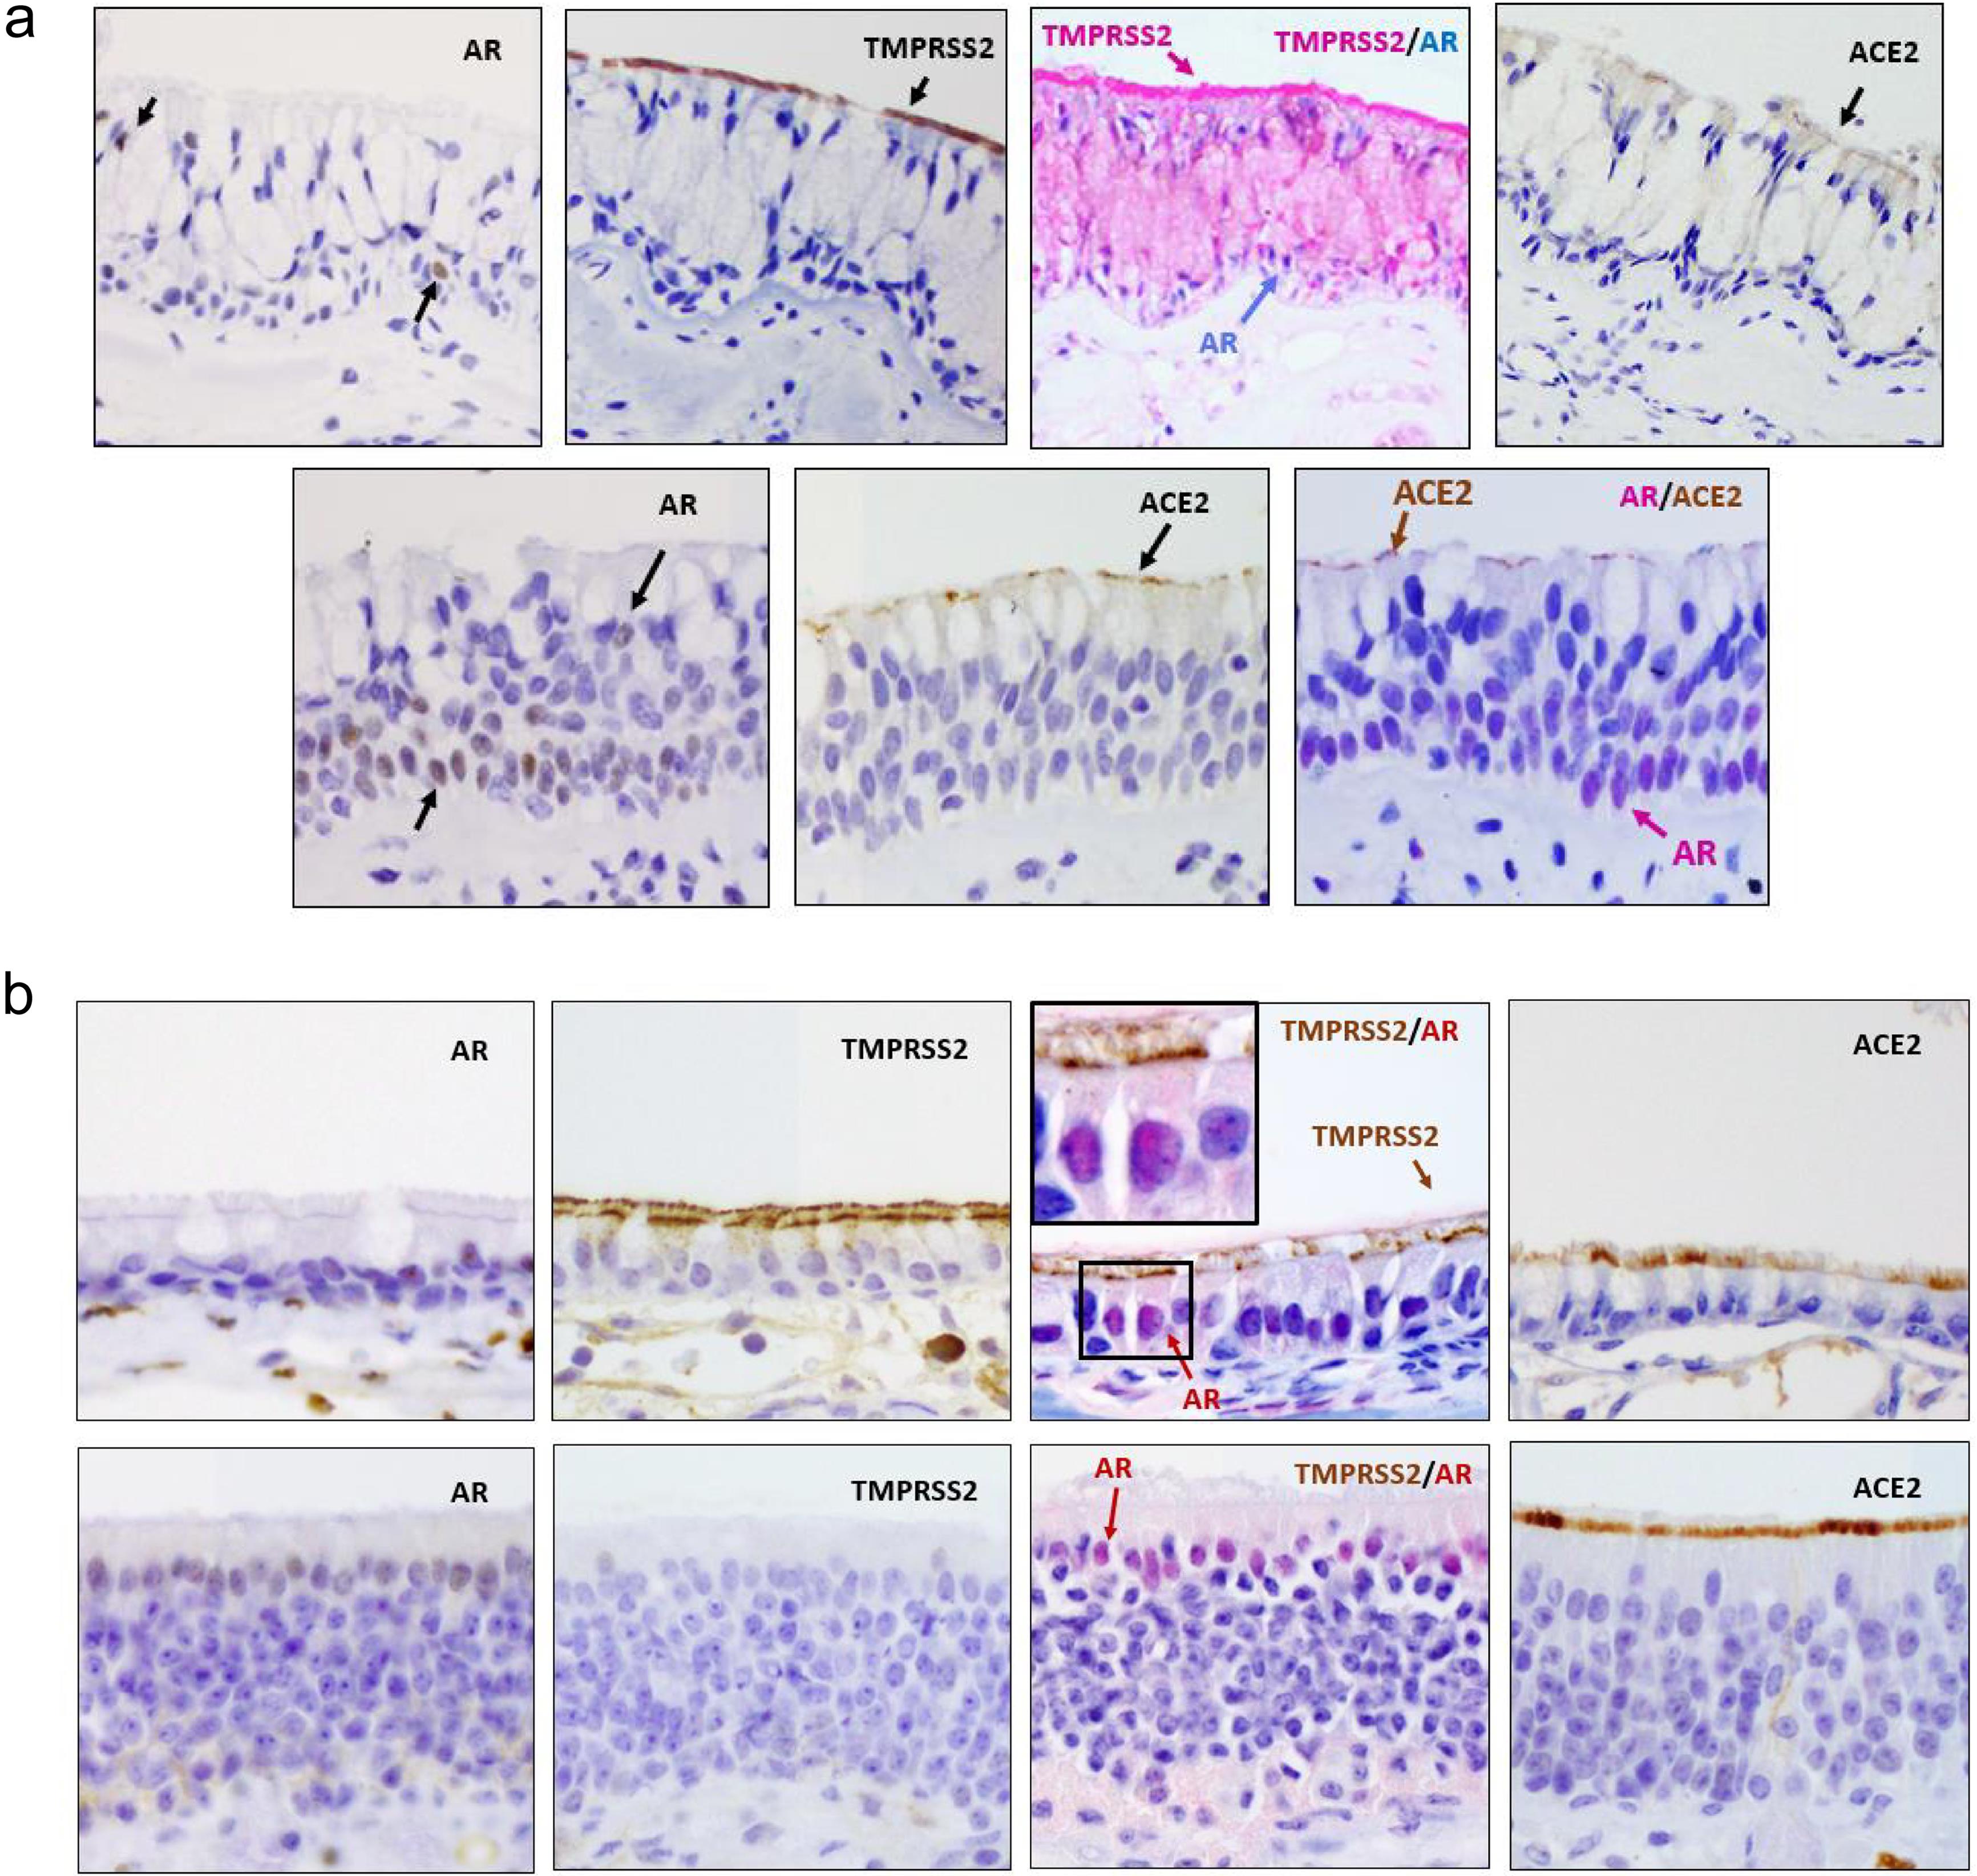 Co-expression of AR and viral entry proteins in the human and murine sinonasal epithelium.